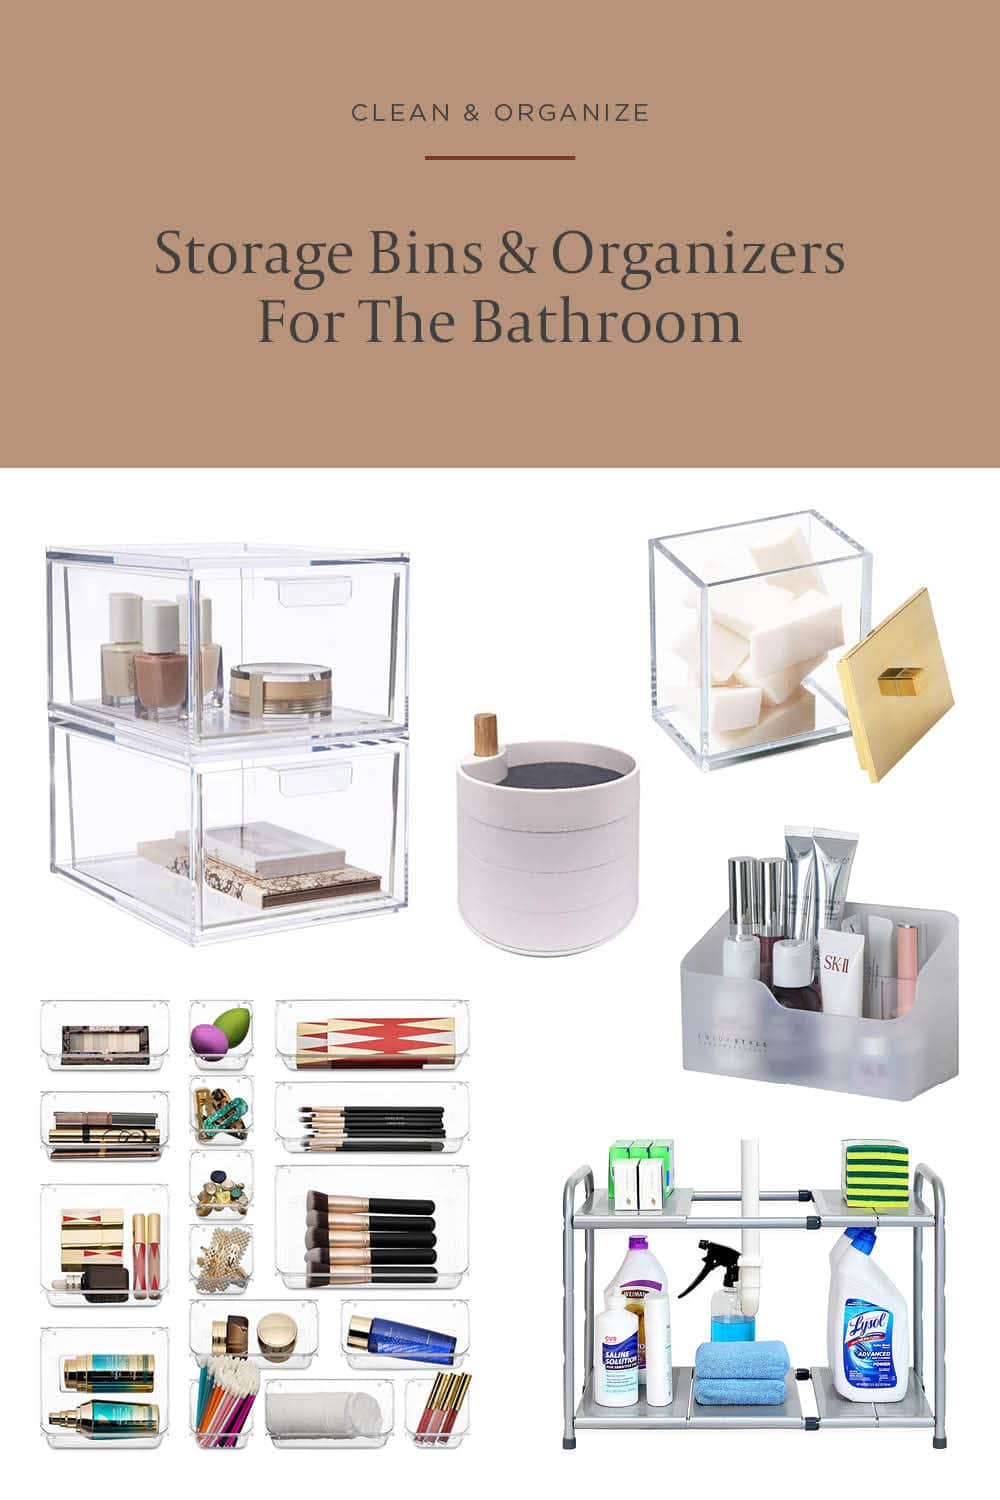 https://houseofhipsters.com/wp-content/uploads/2021/09/best-home-organization-products-bathroom-cabinets.jpg